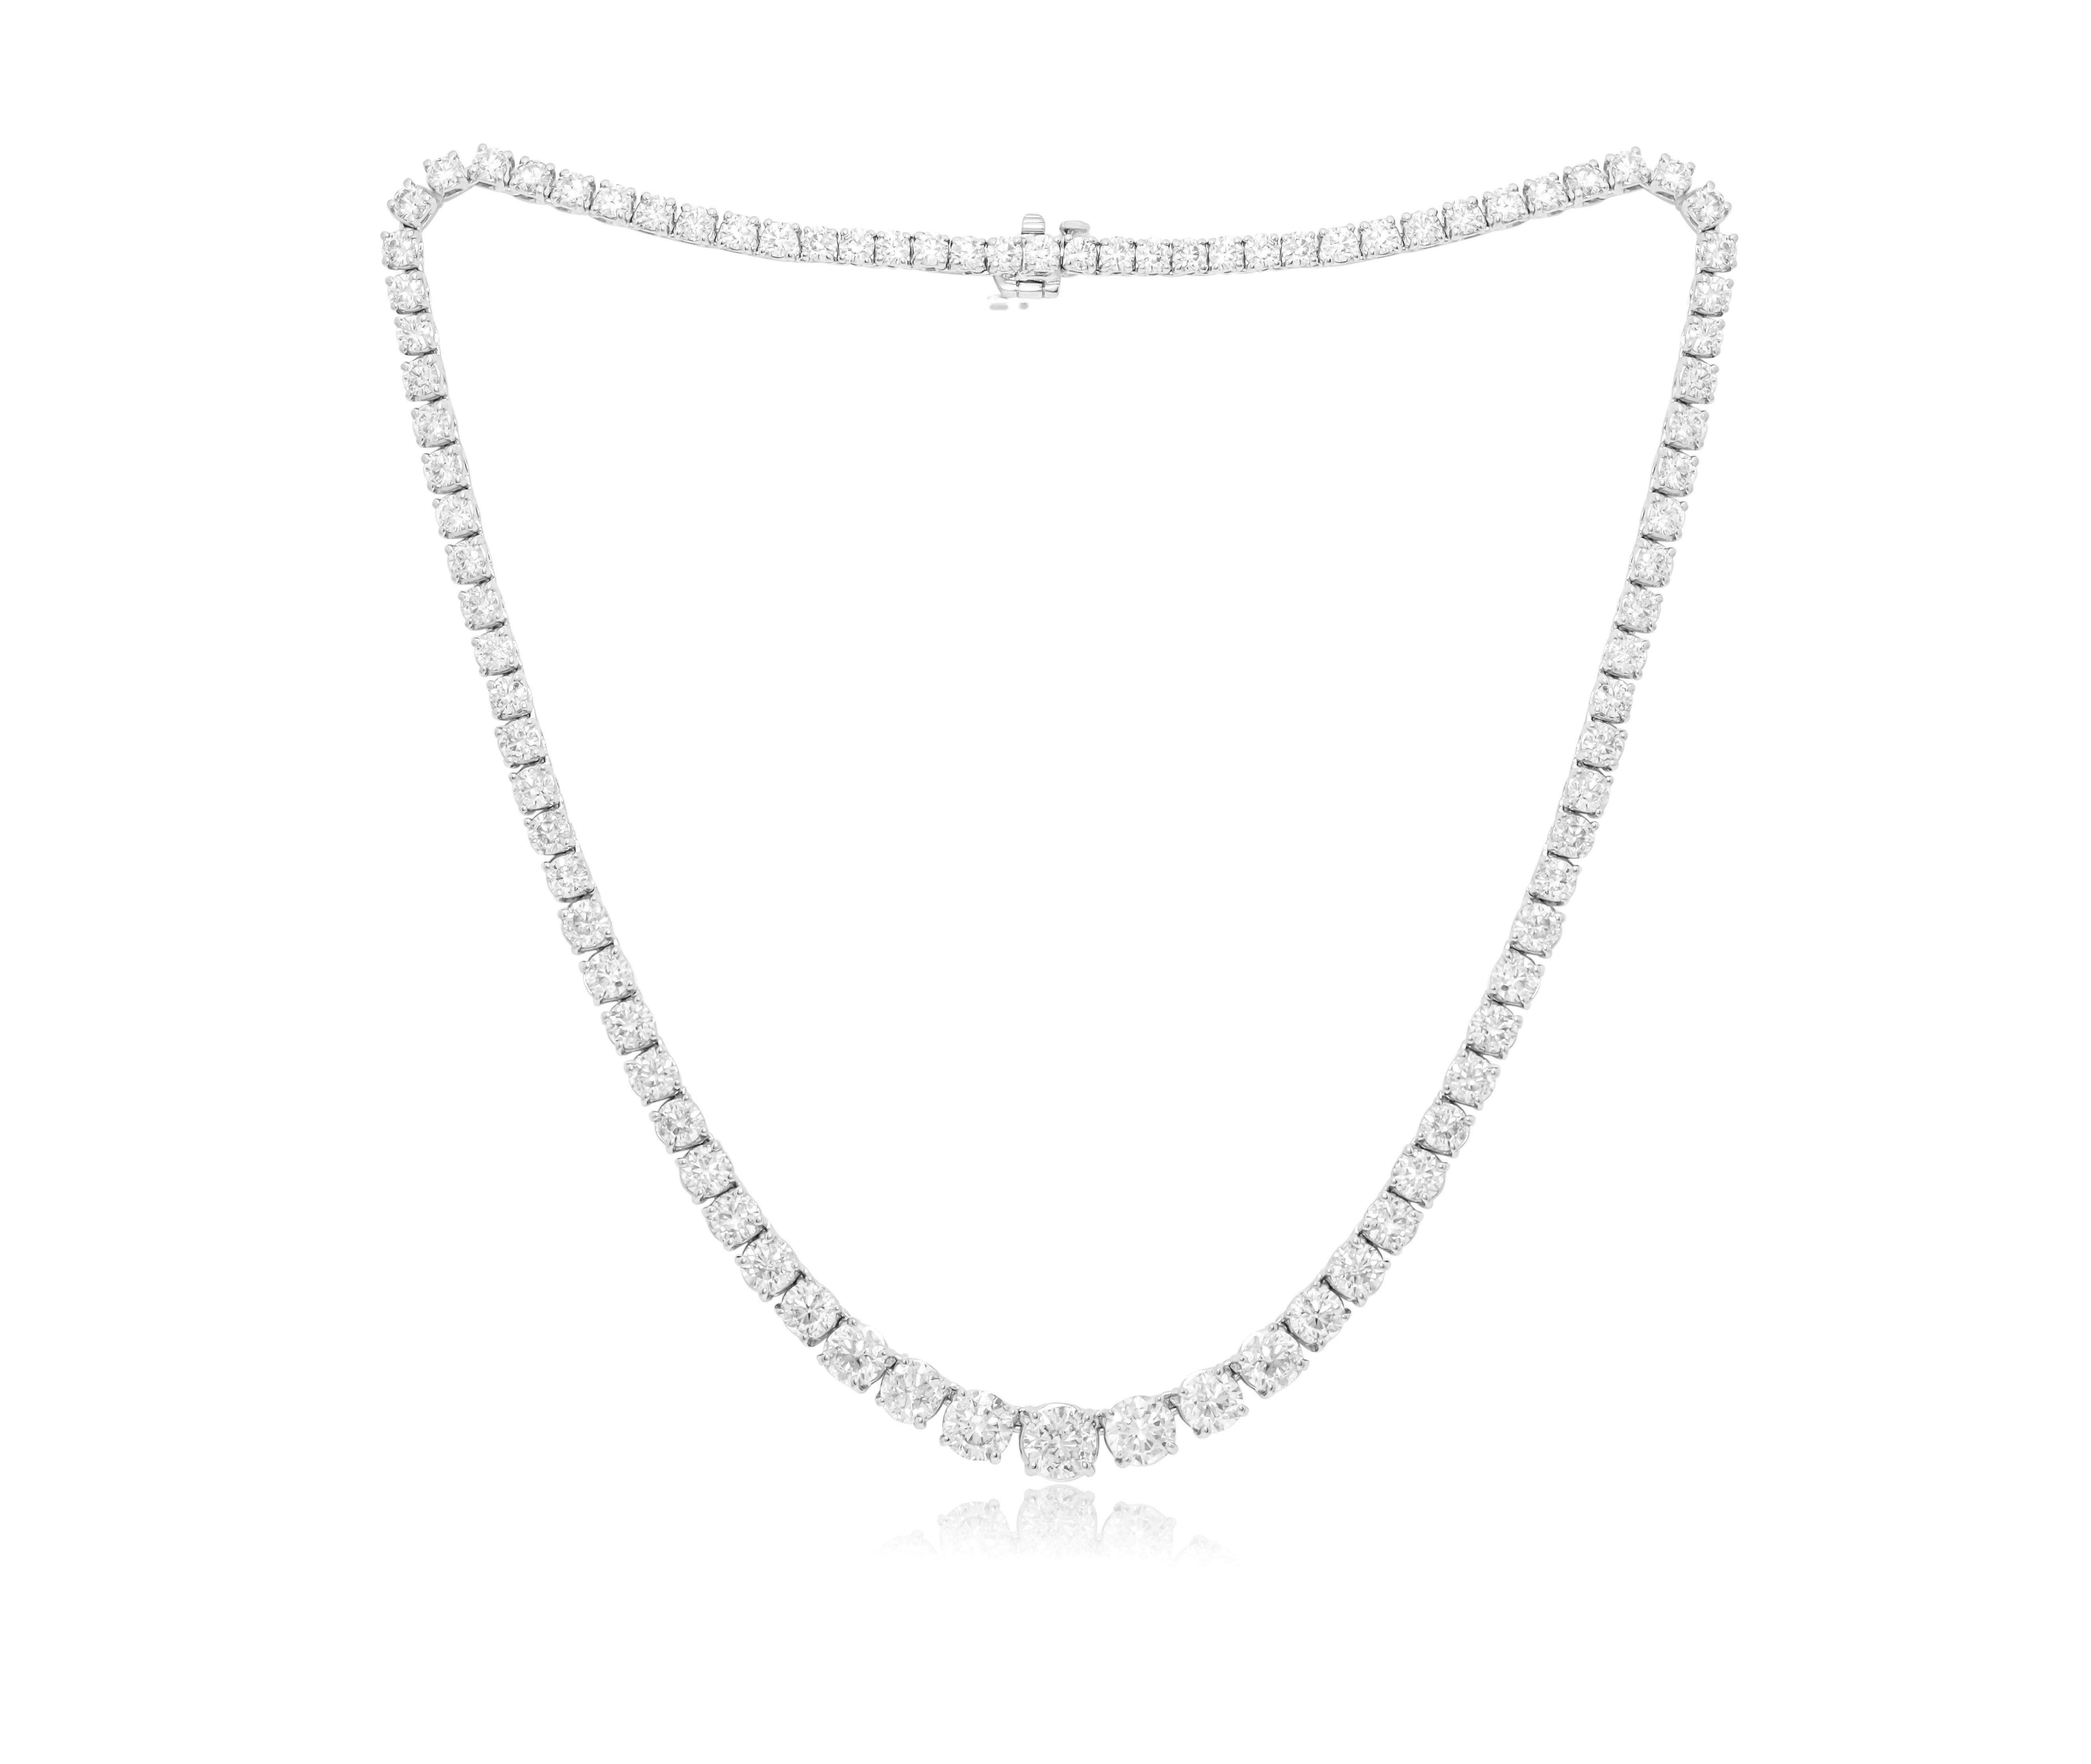 Custom 14k white gold graduated tennis necklace f17.70 cts  round brilliant diamonds set in a 4 prong setting  107 stones  0.17 each FG color SI clarity. Excellent  cut. 